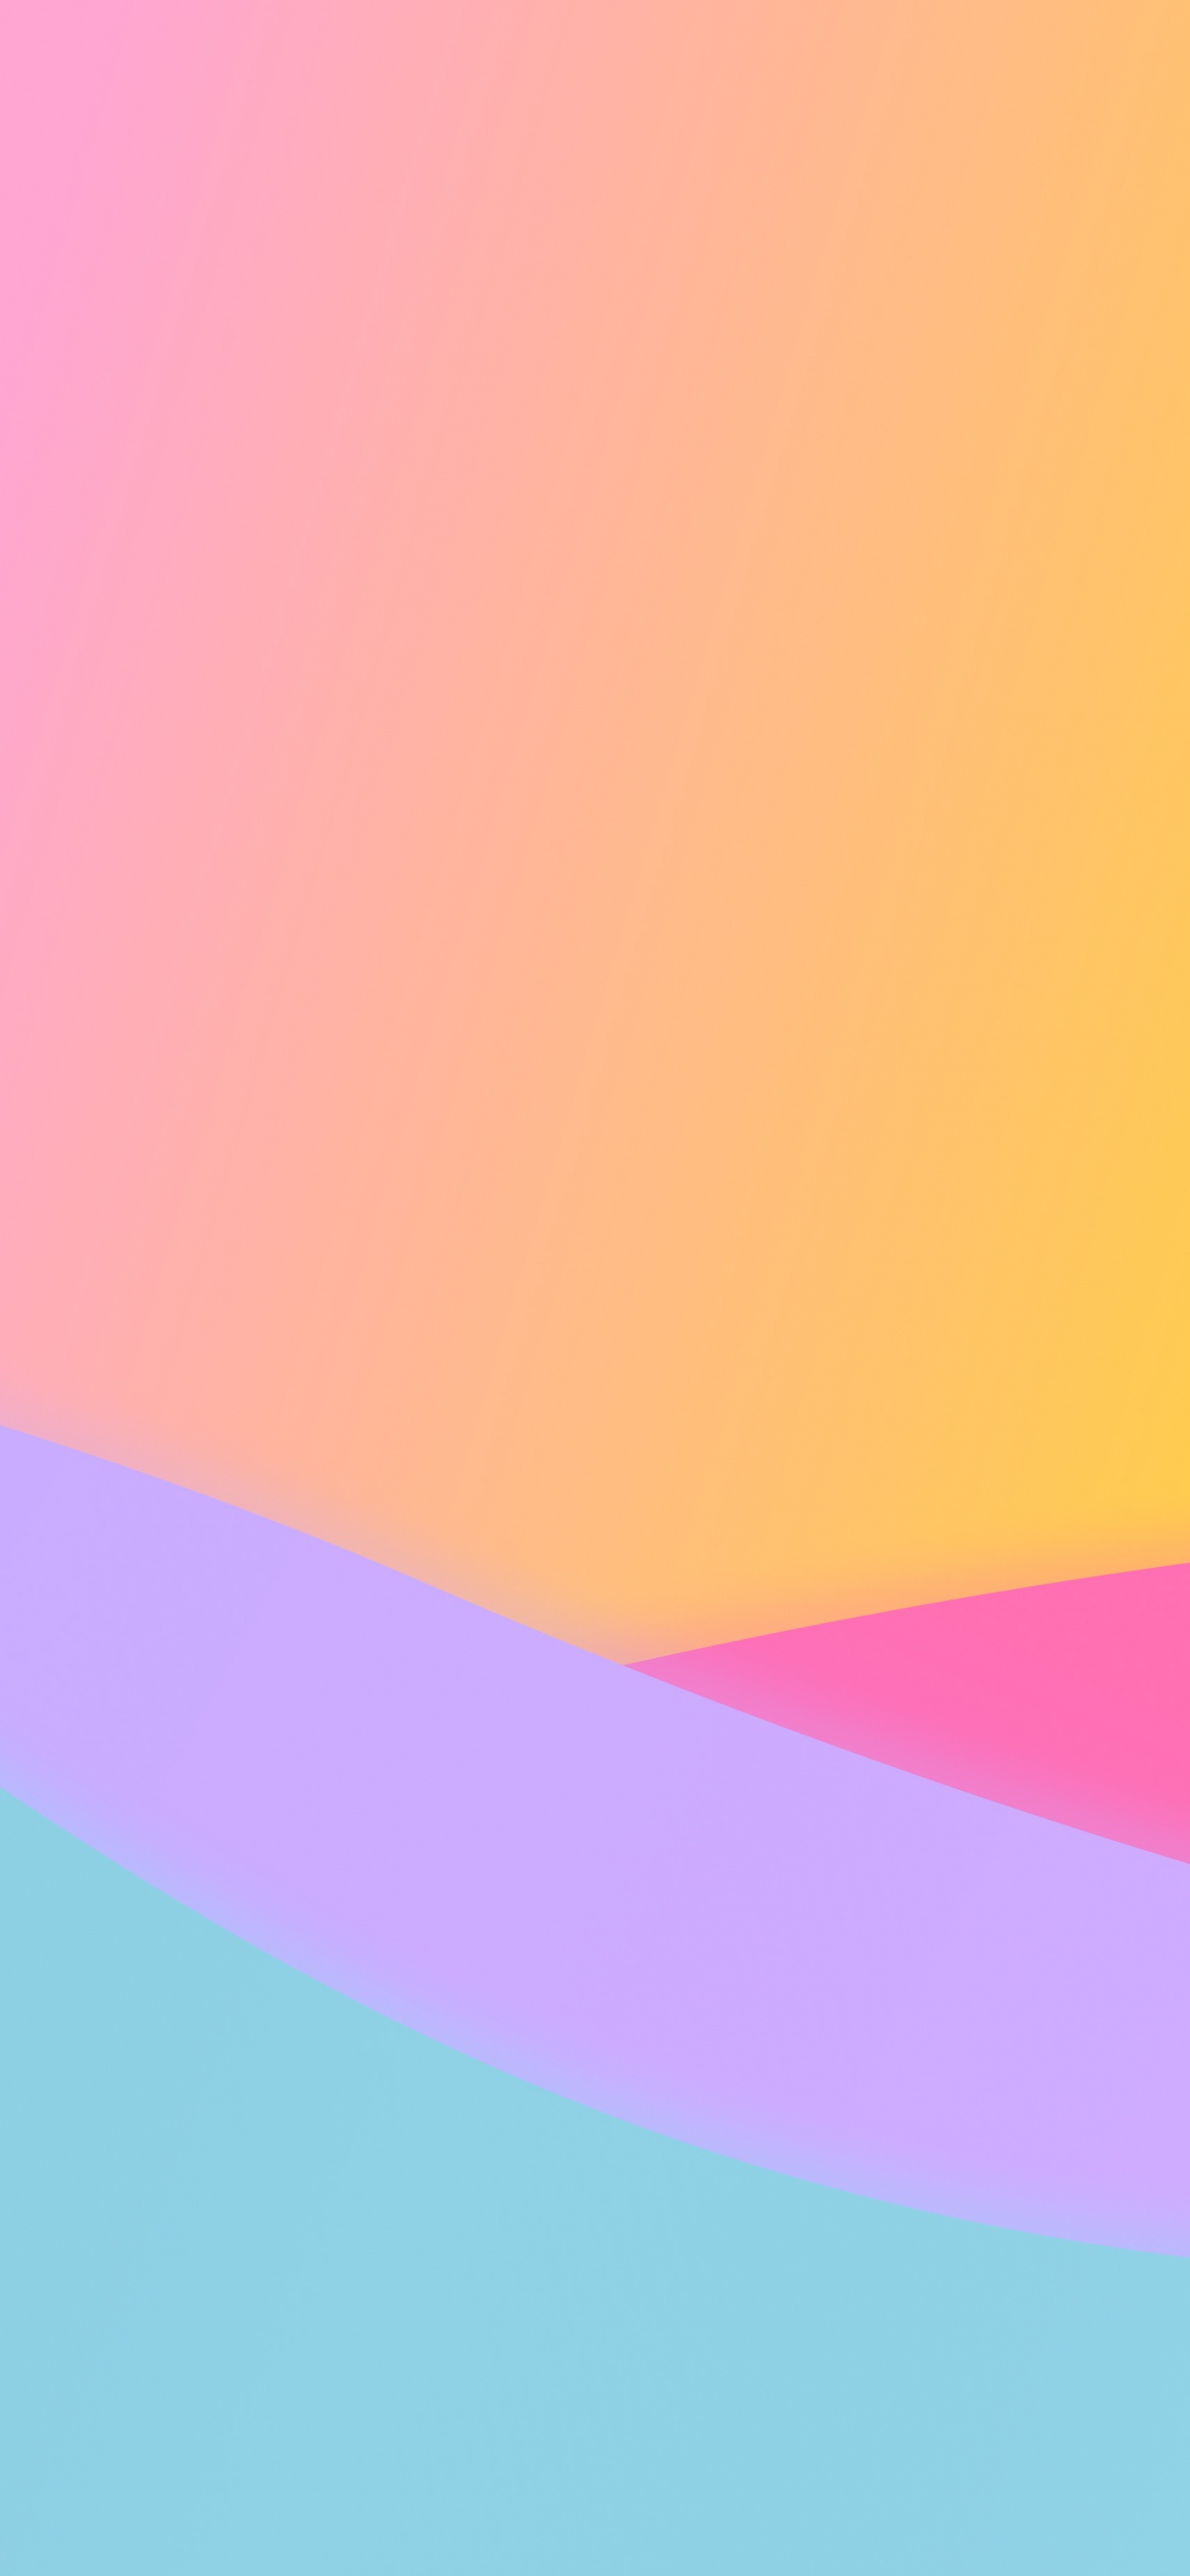 Apples, IOS 14, Ios, Colorfulness, Violet. Wallpaper in 1242x2688 Resolution